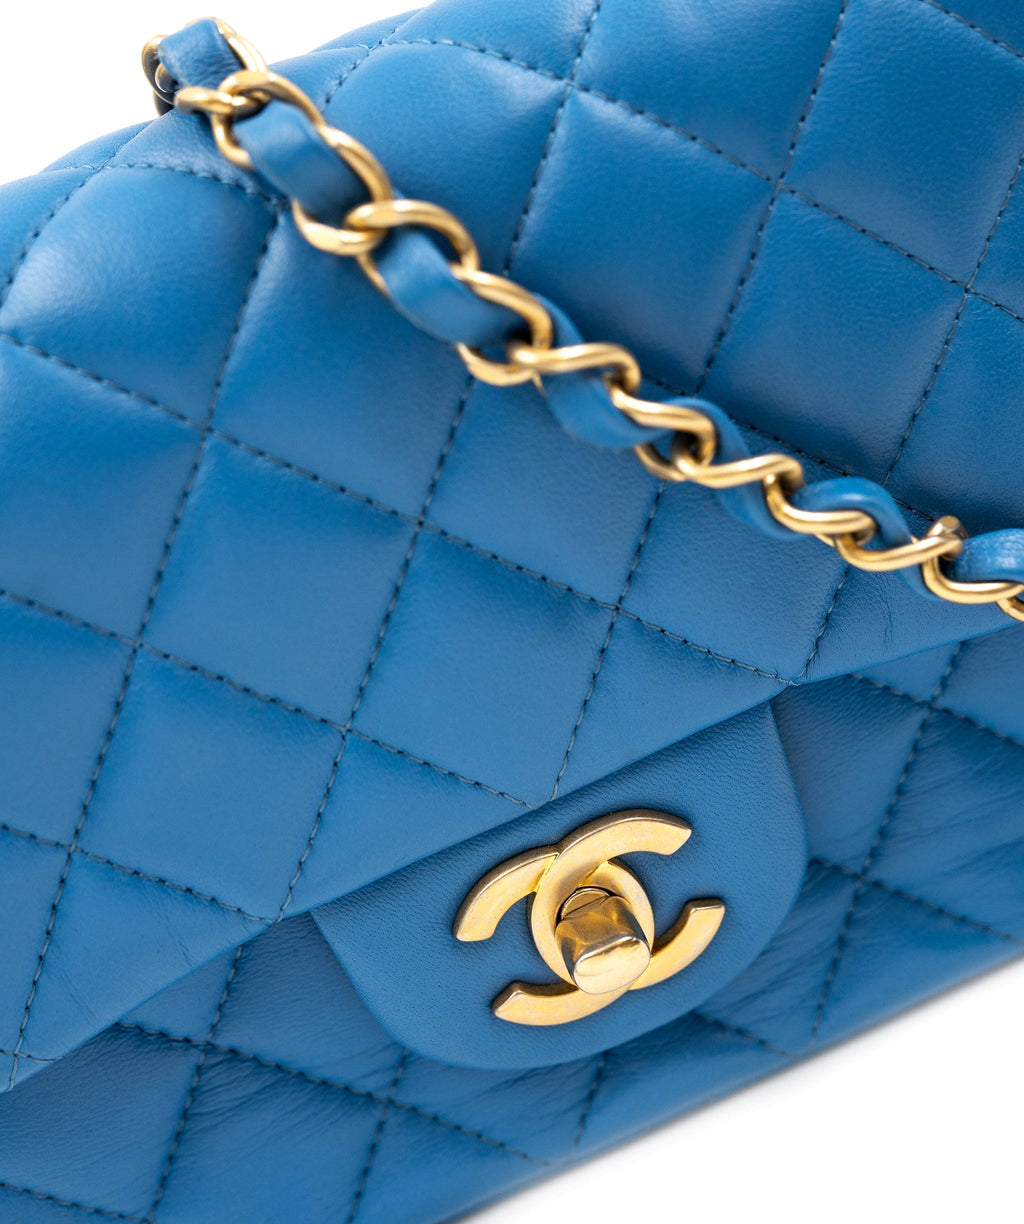 Chanel Square Classic Single Flap Bag Quilted Lambskin Mini Blue 22394323